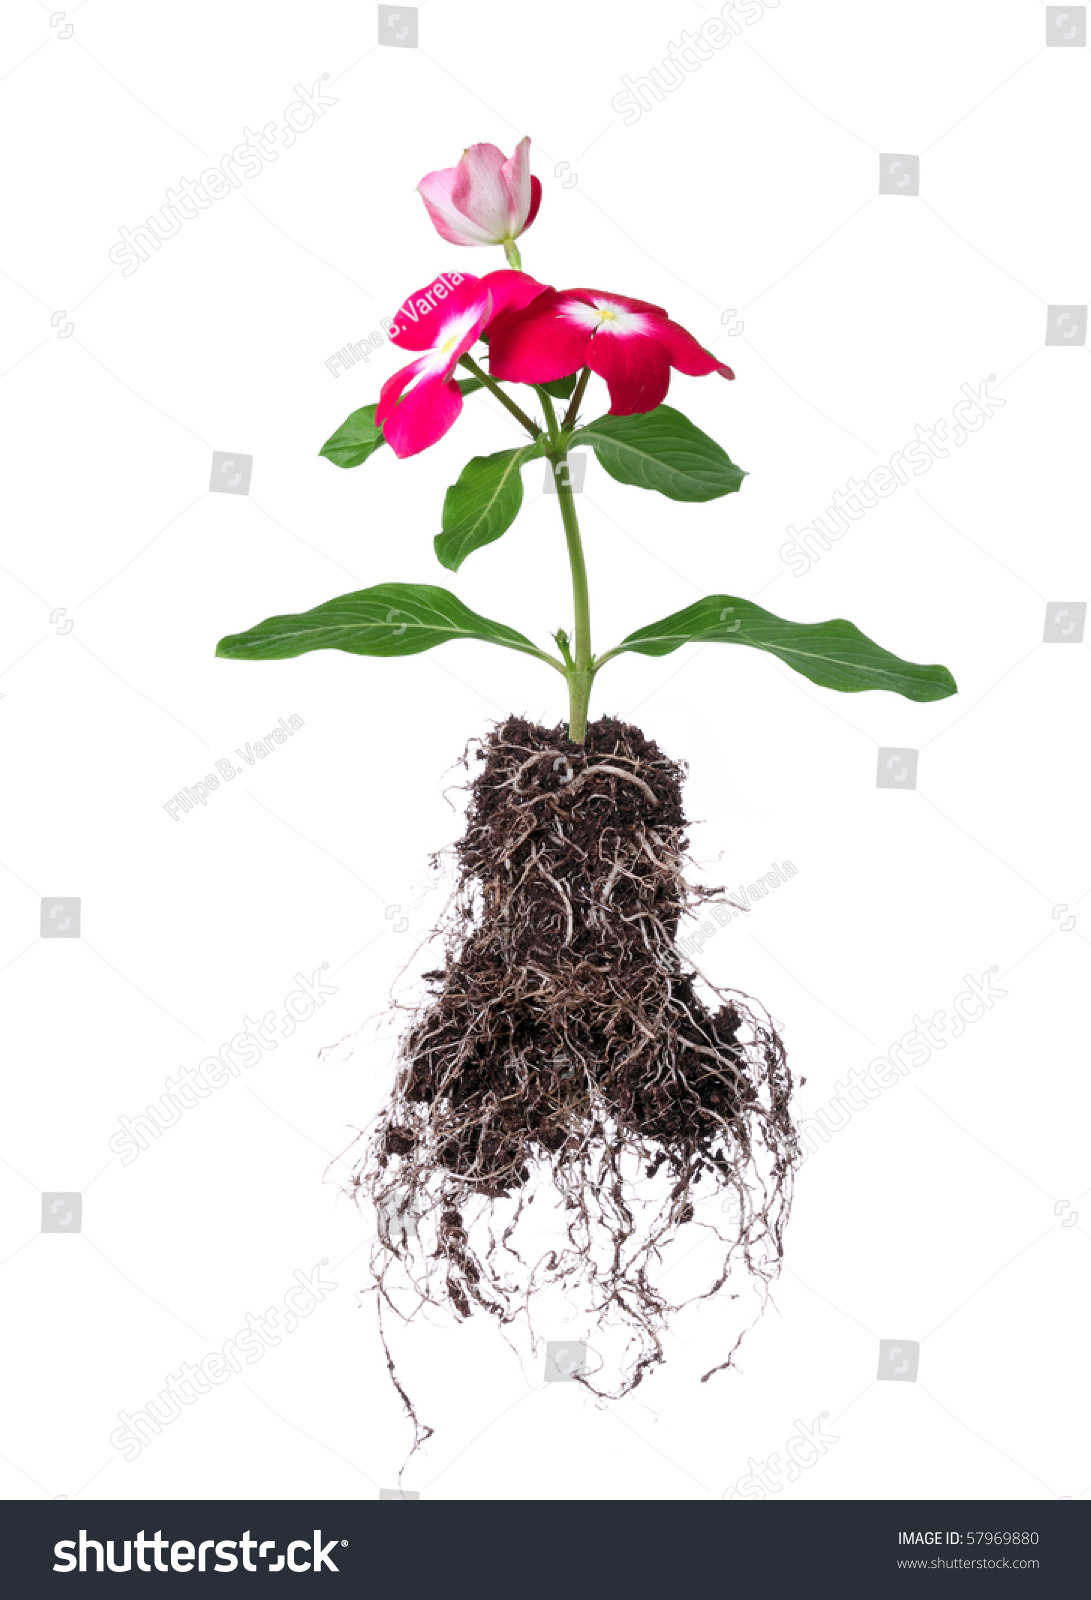 Flower With Root Isolated On White Background Stock Photo 57969880